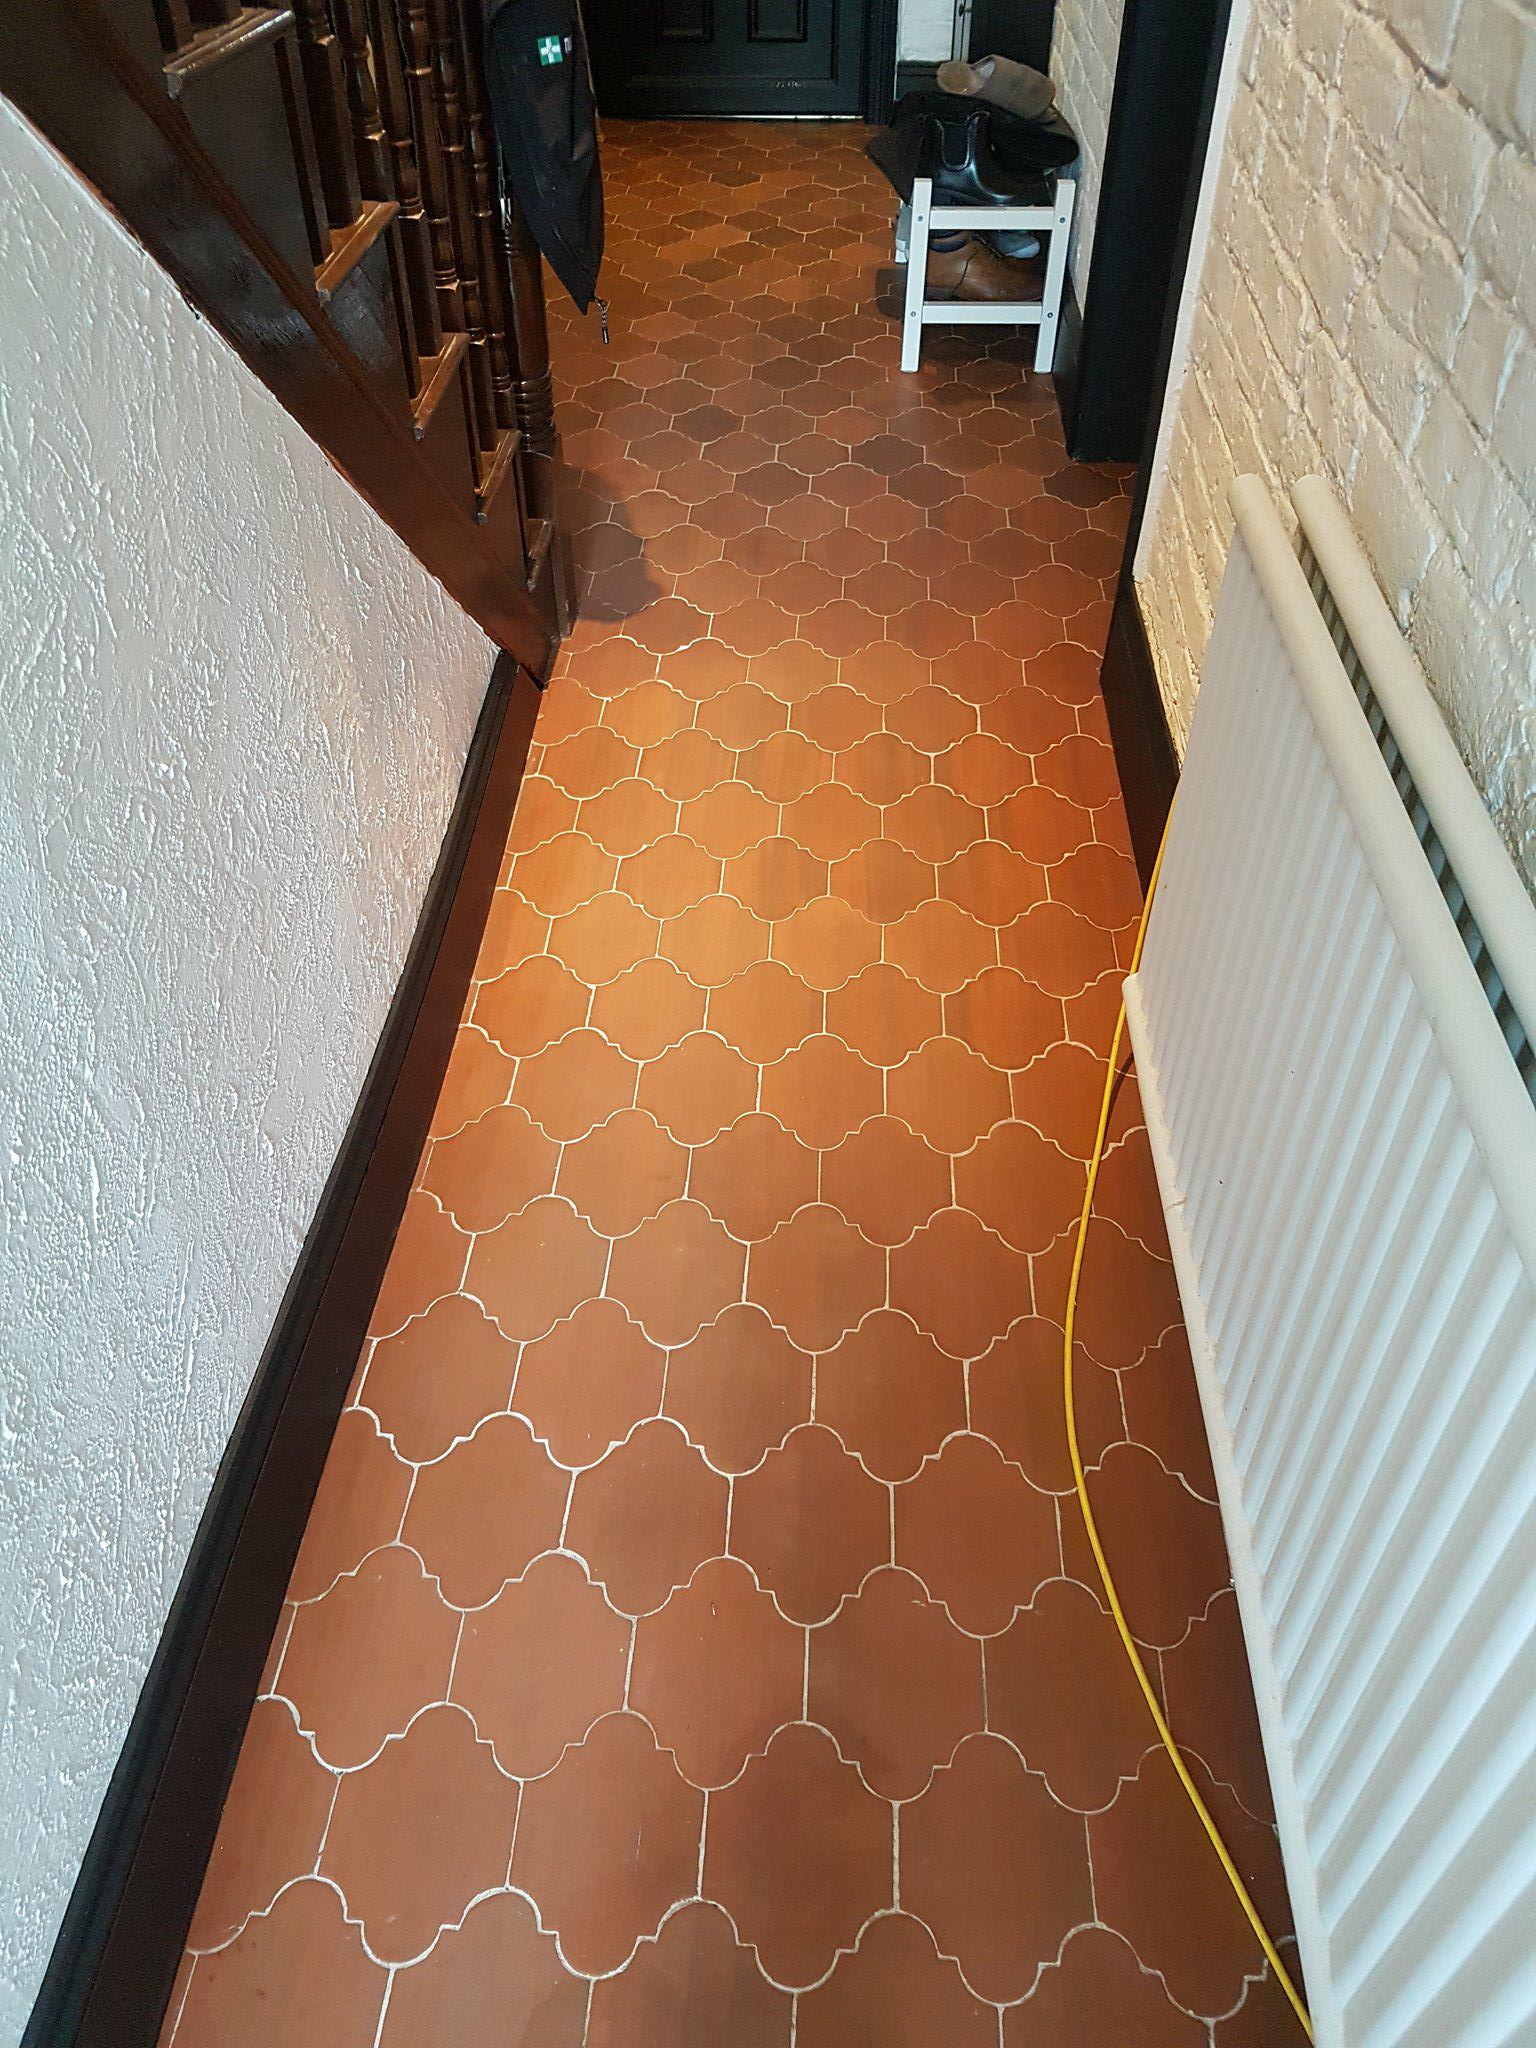 Quarry Tile Floor Cleaning and Sealing